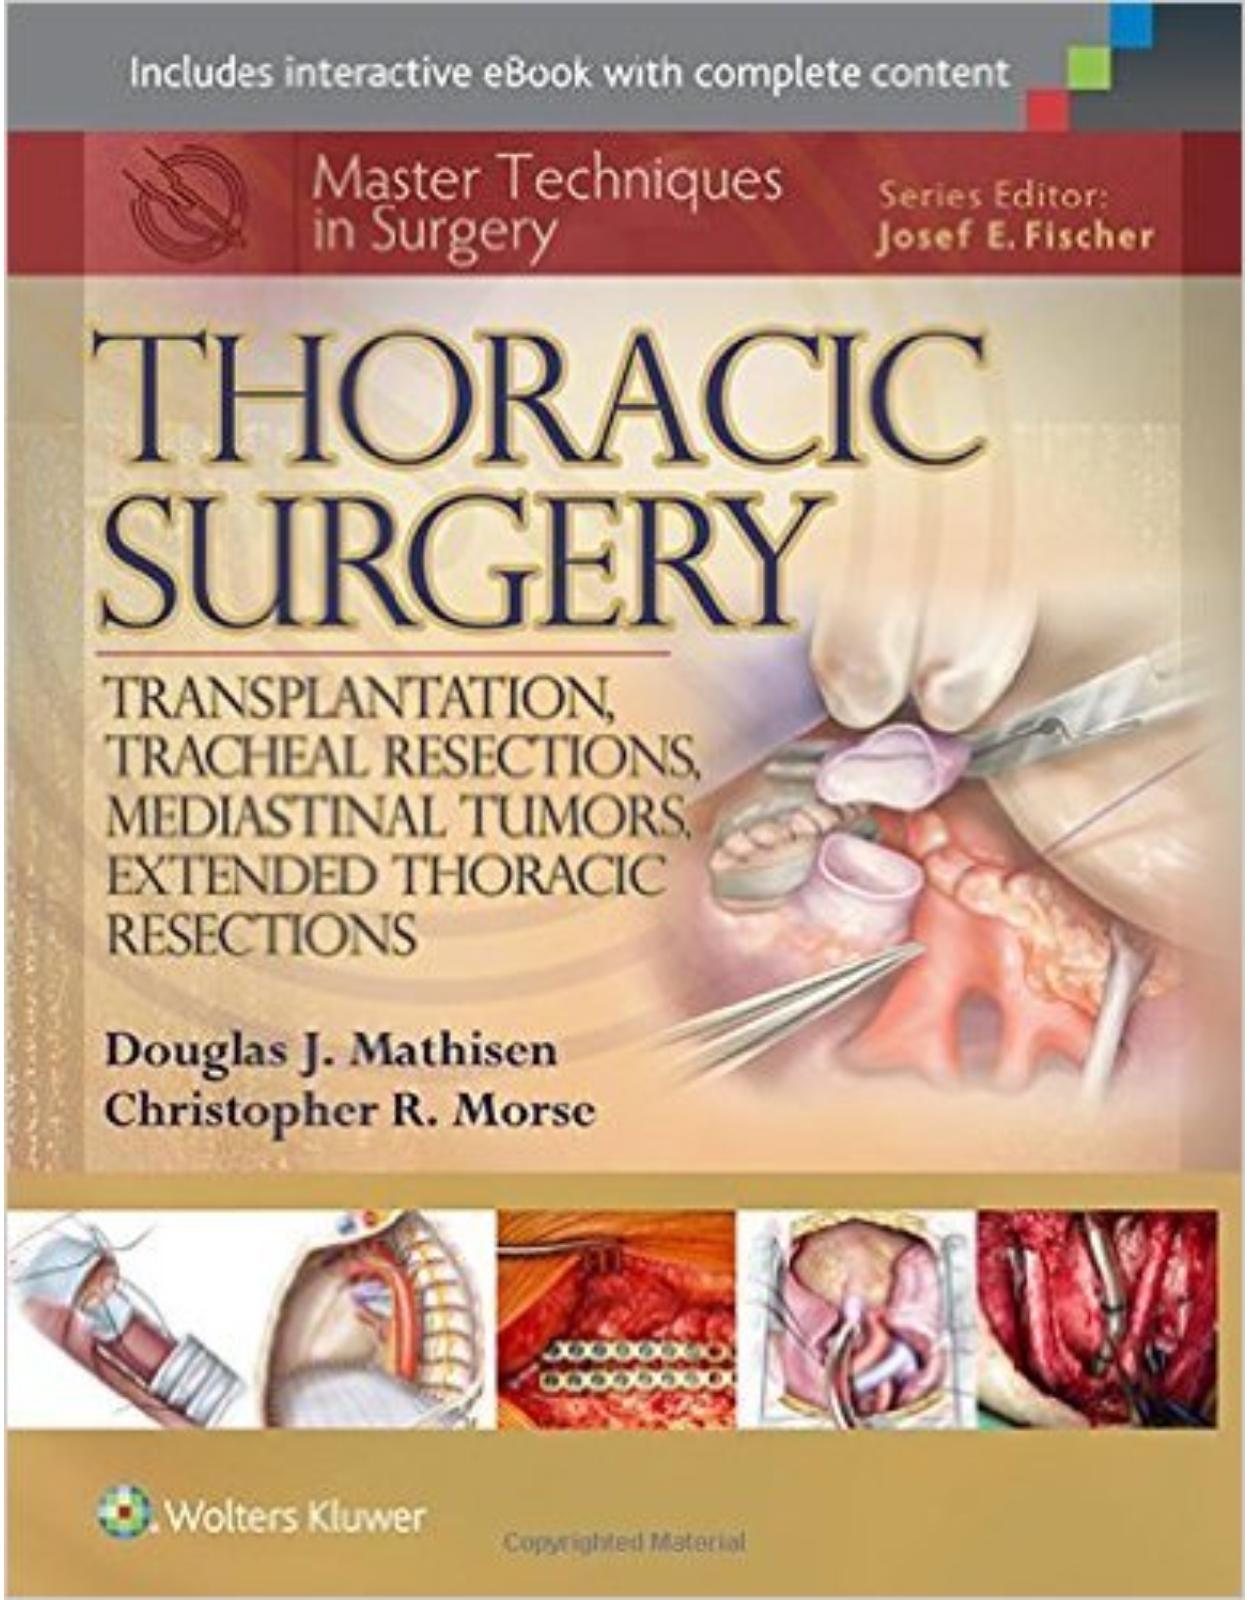 Master Techniques in Surgery: Thoracic Surgery: Transplantation, Tracheal Resections, Mediastinal Tumors, Extended Thoracic Resections First Edition